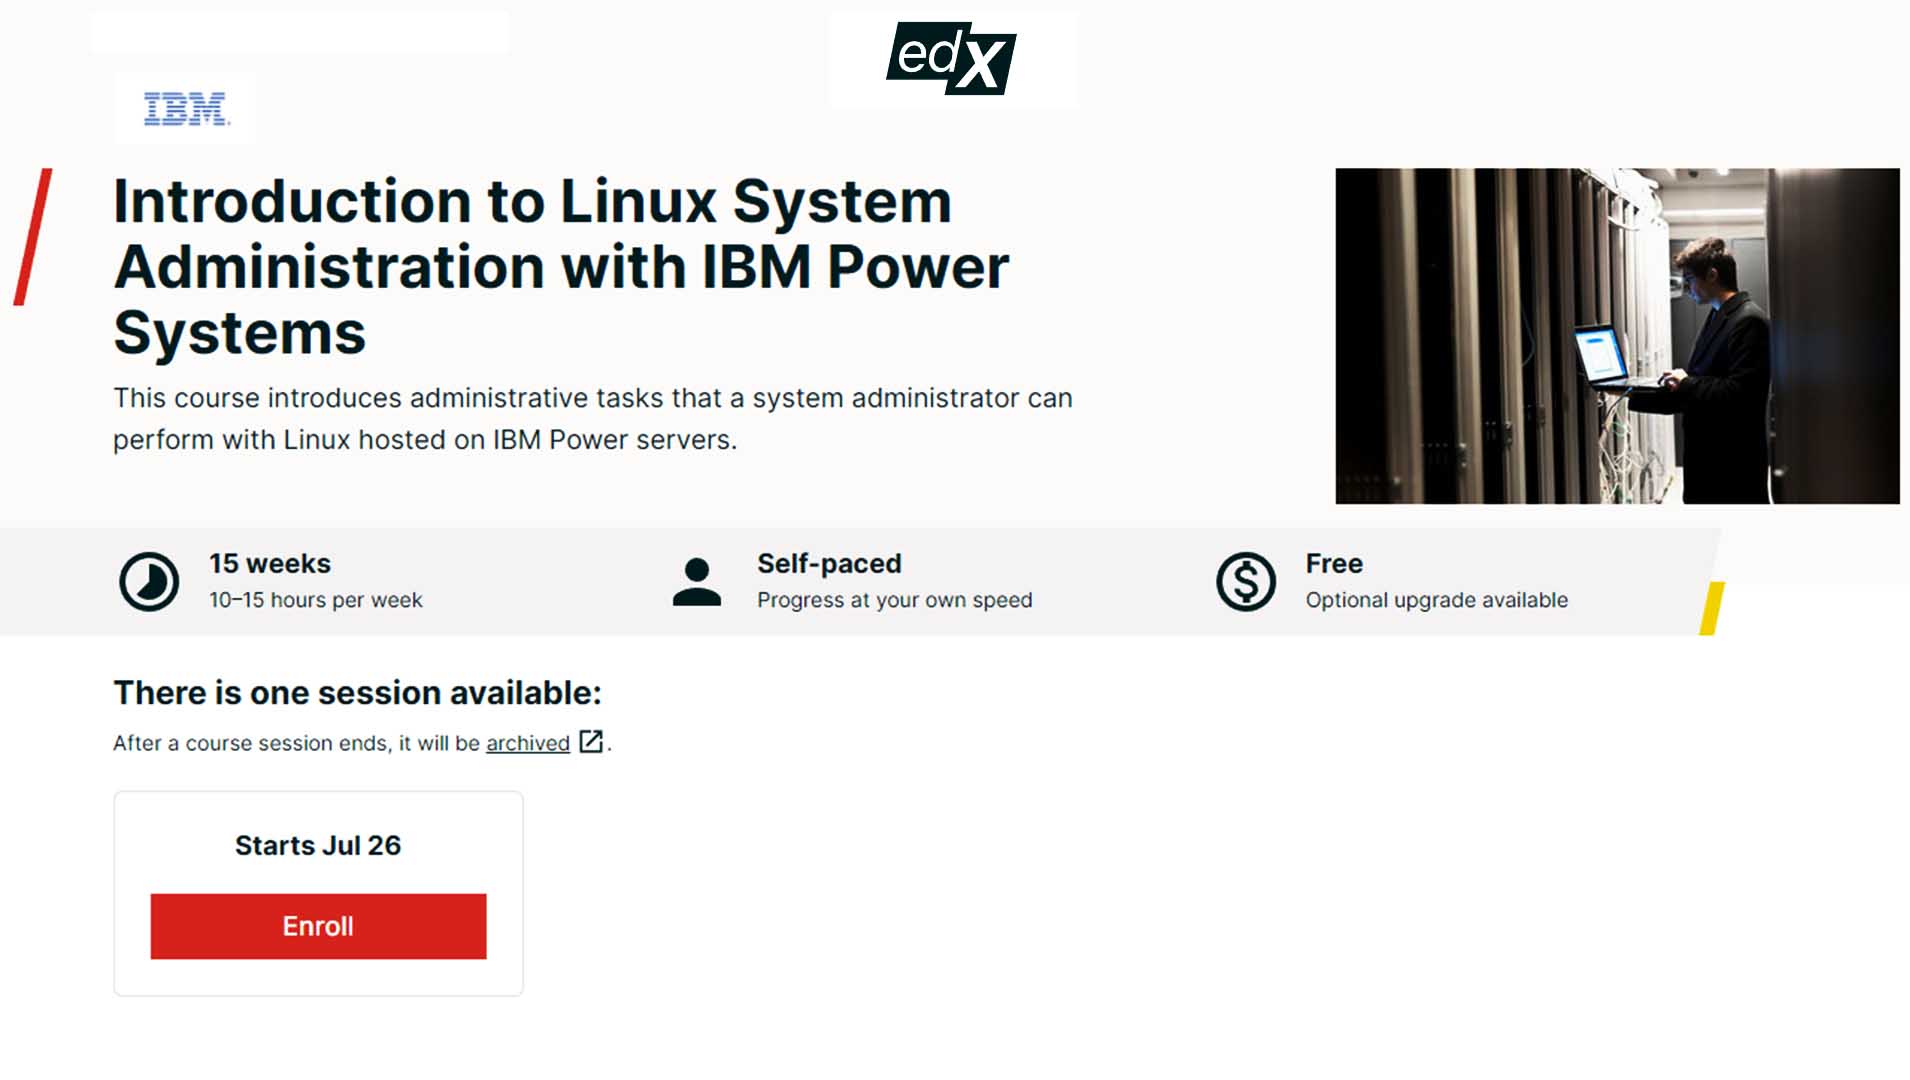 Introduction to Linux System Administration with IBM Power Systems